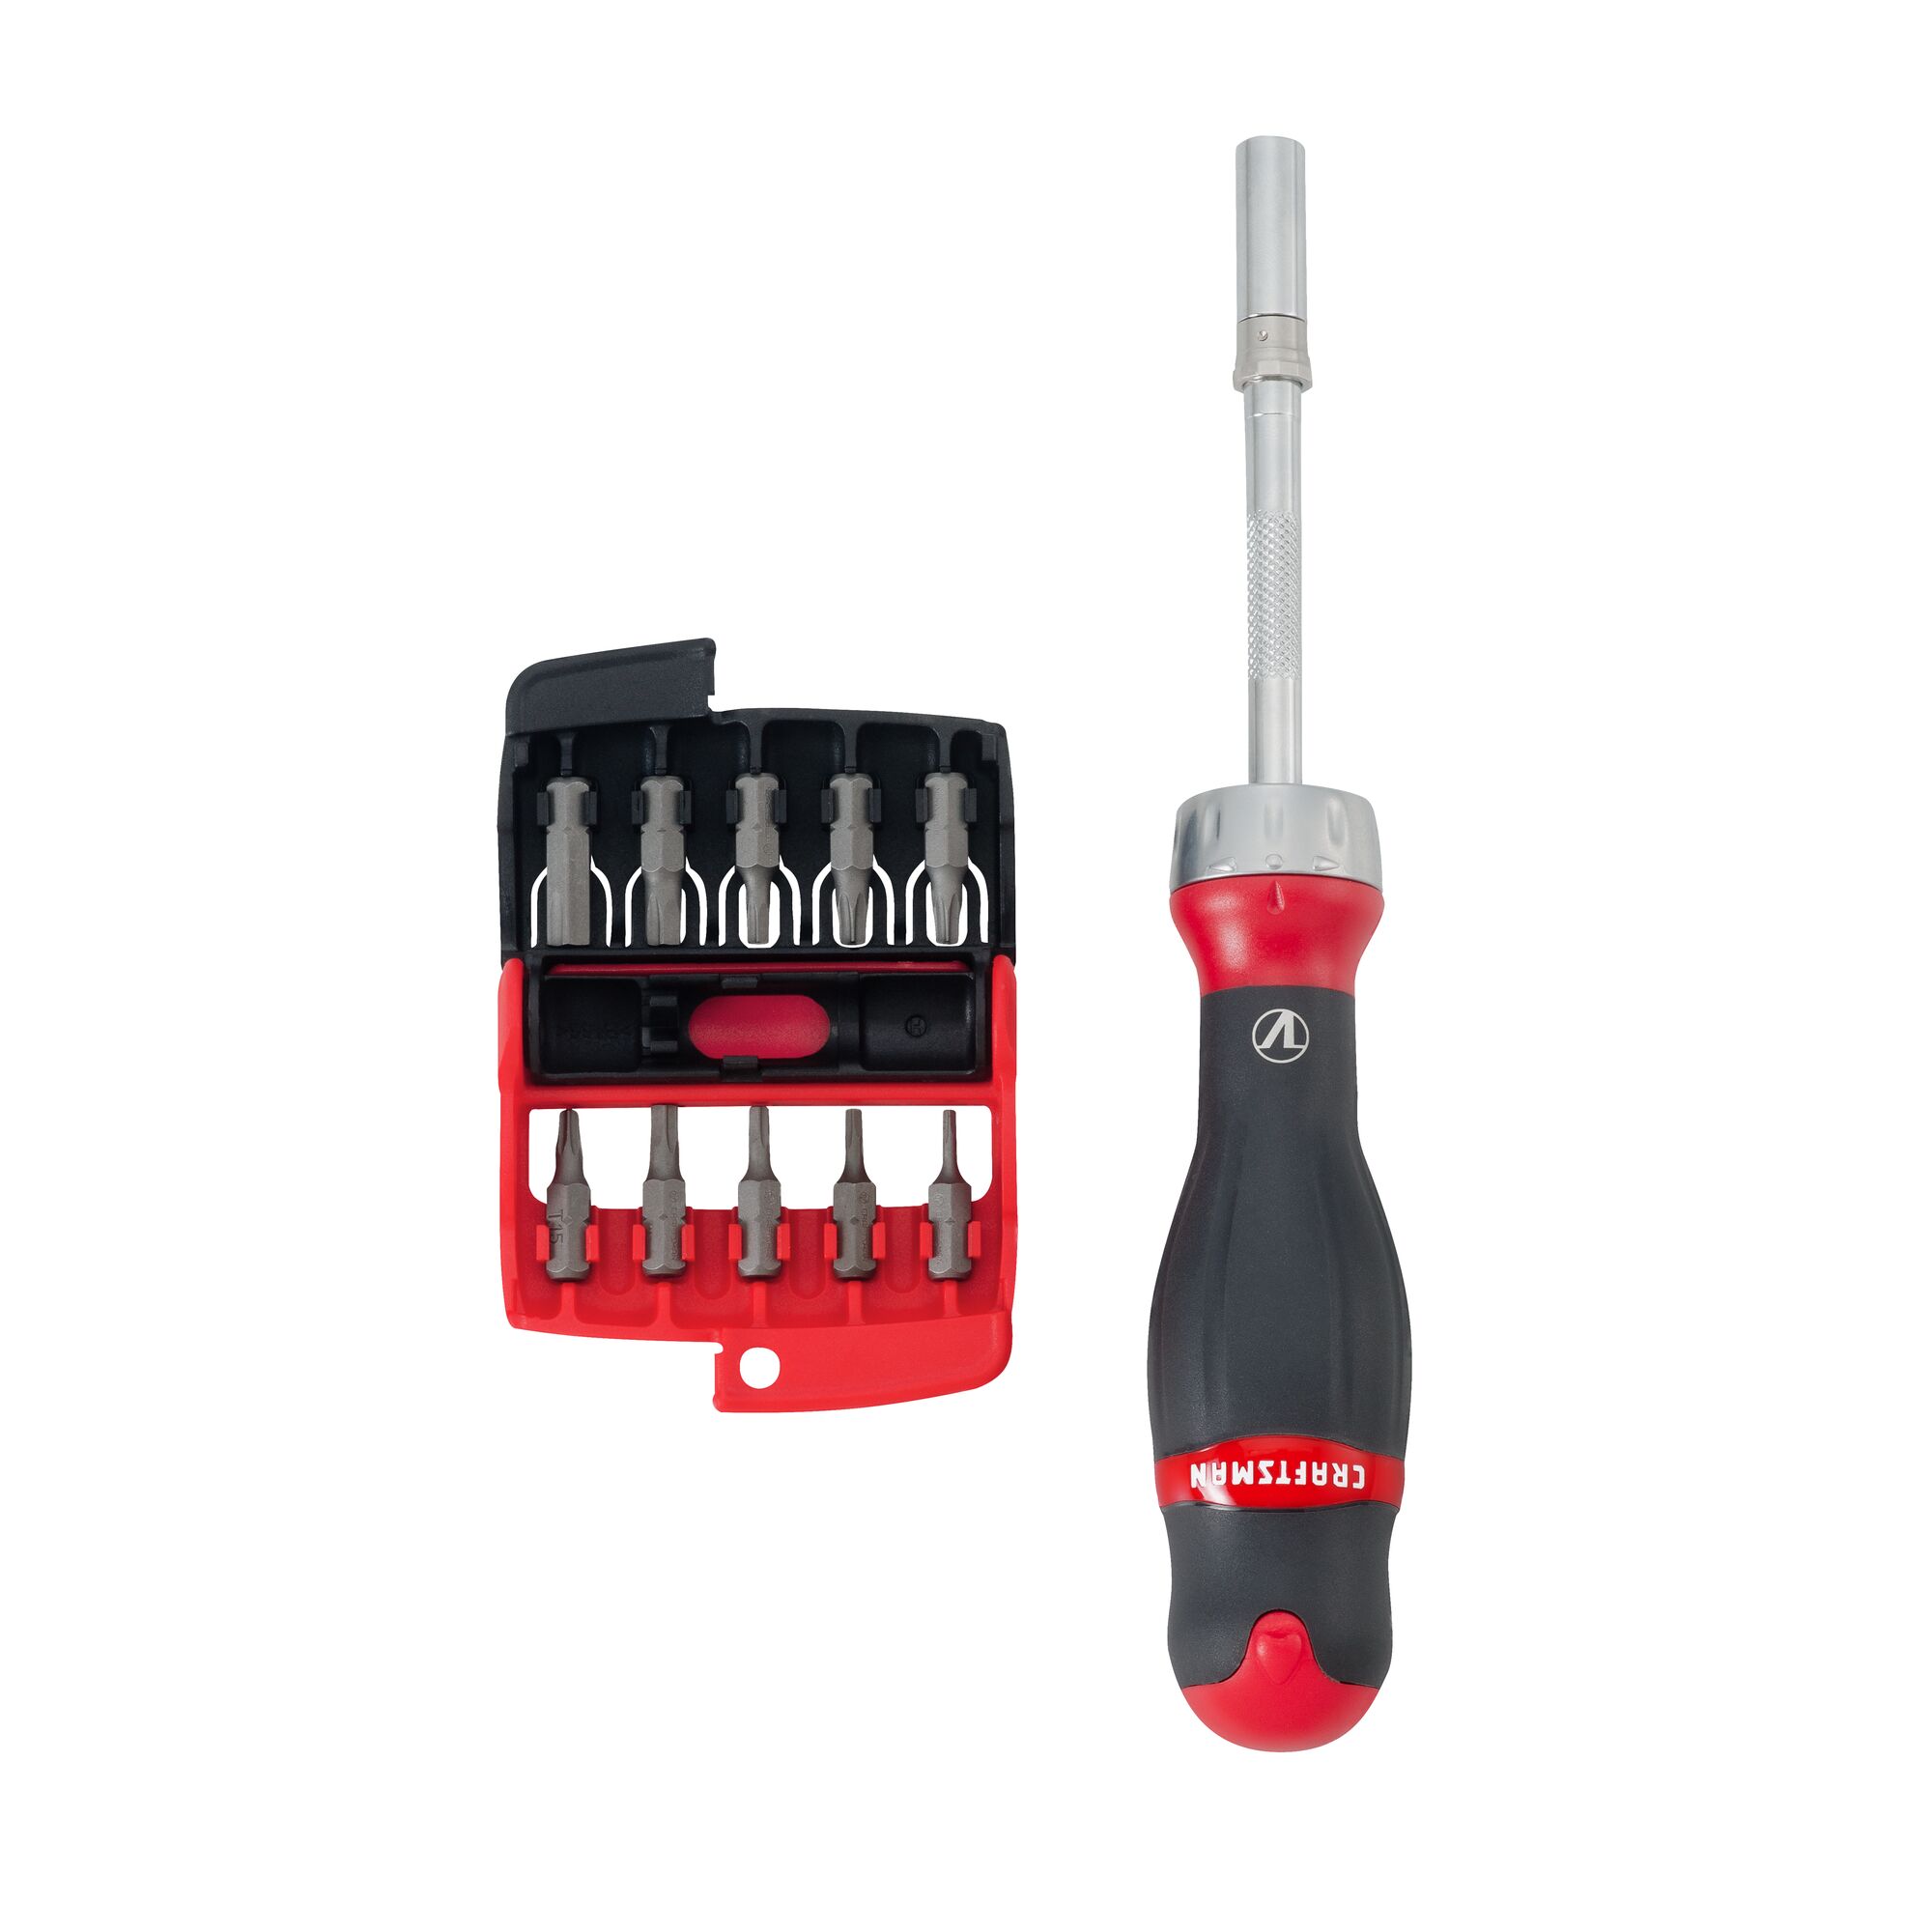 View of CRAFTSMAN Screwdrivers on white background